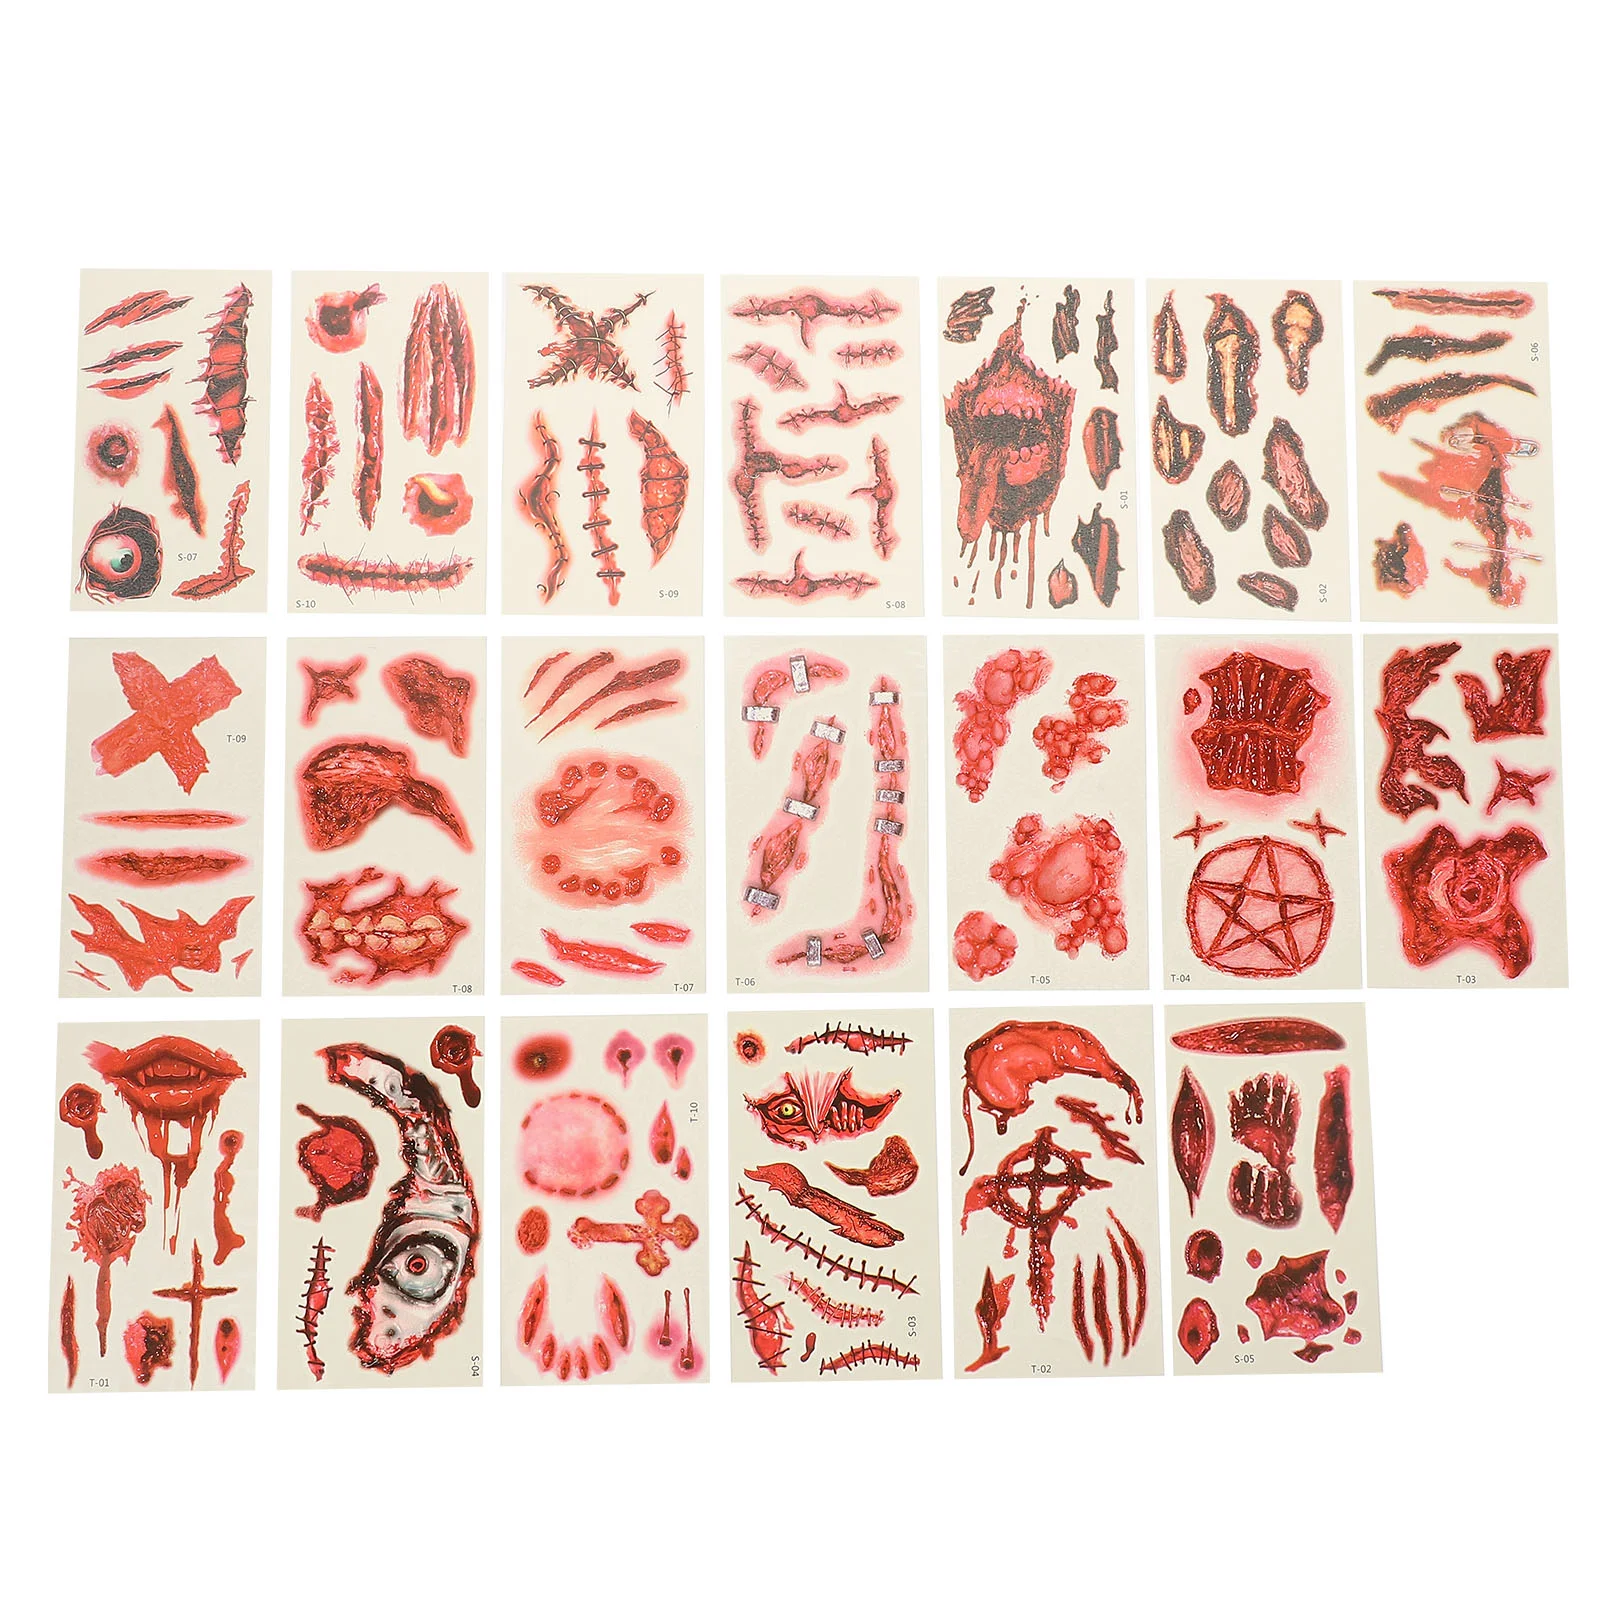 

Scar Stickers Face Temporary Tattoos Halloween Themed Supplies Spoof Wound Decals Facial Makeup Waterproof